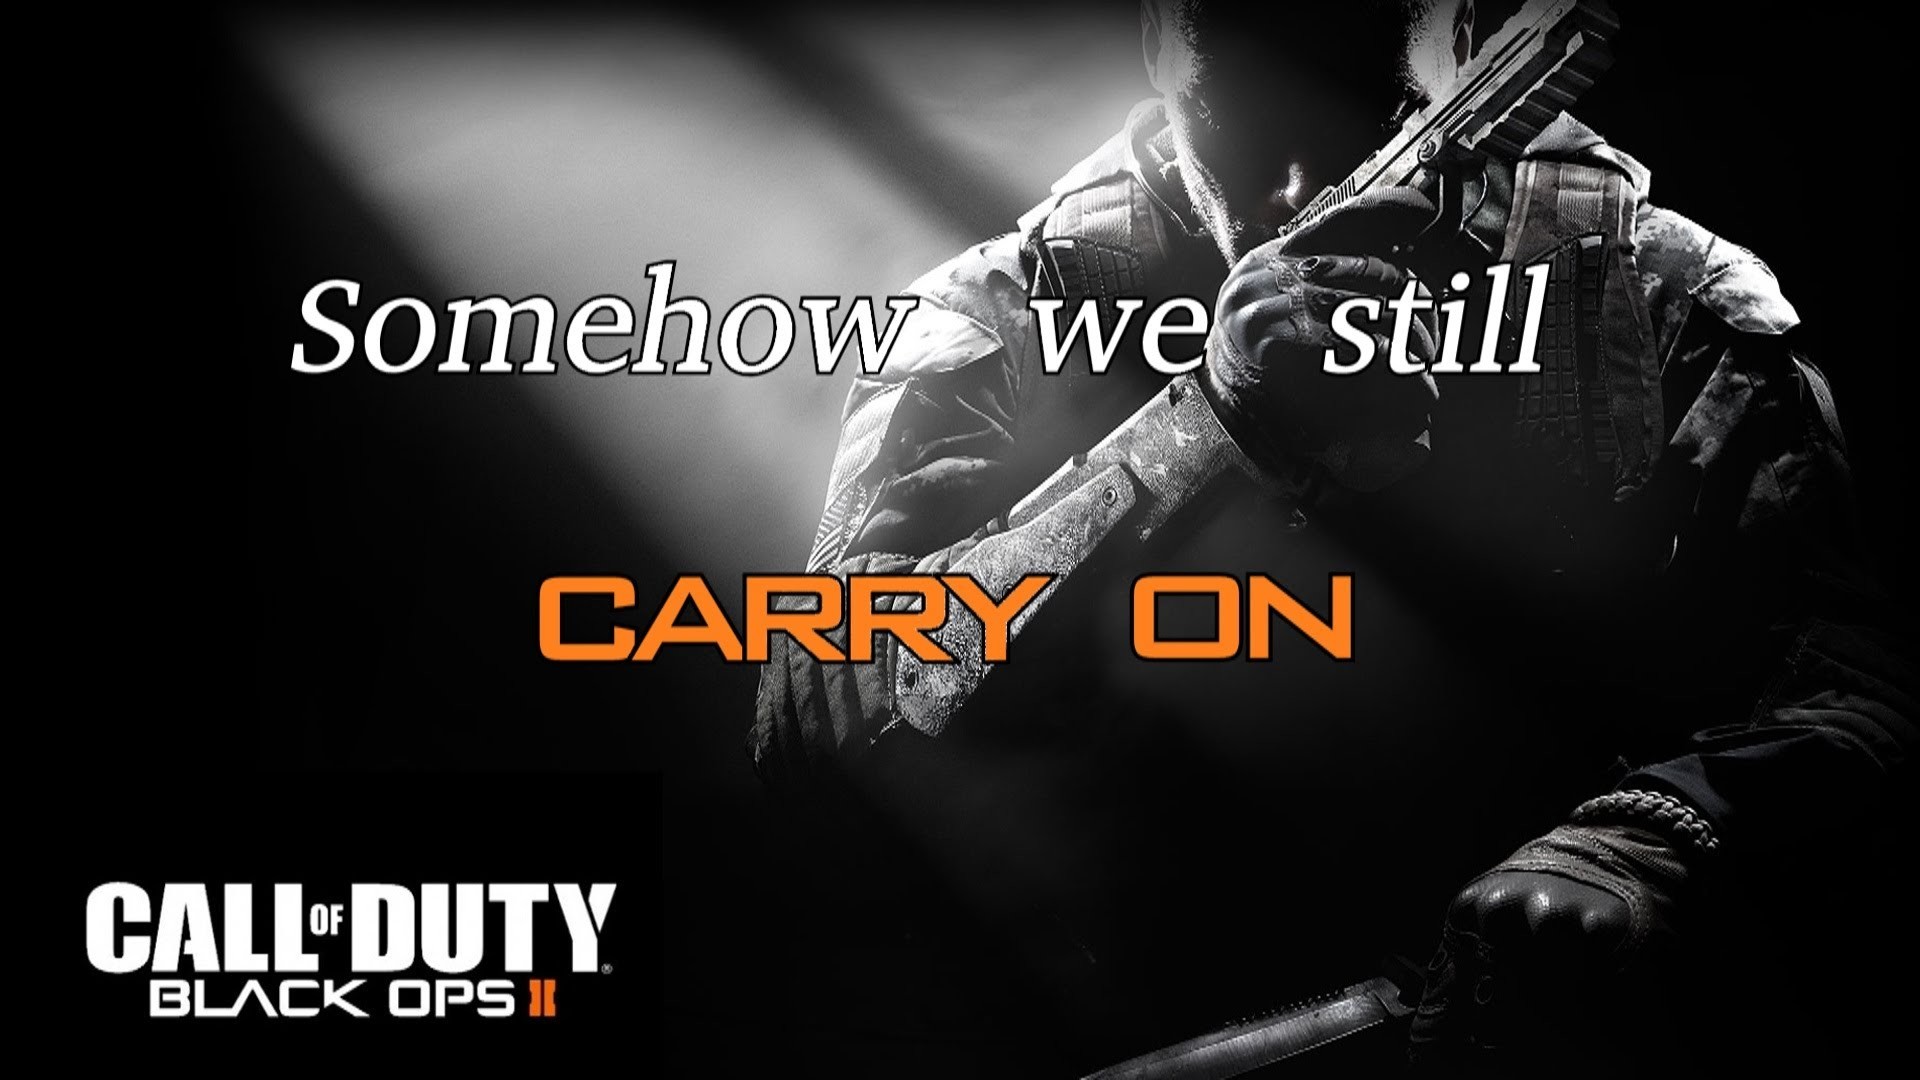 1920x1080 Avenged Sevenfold - Carry On [Lyric Video] | By feargm